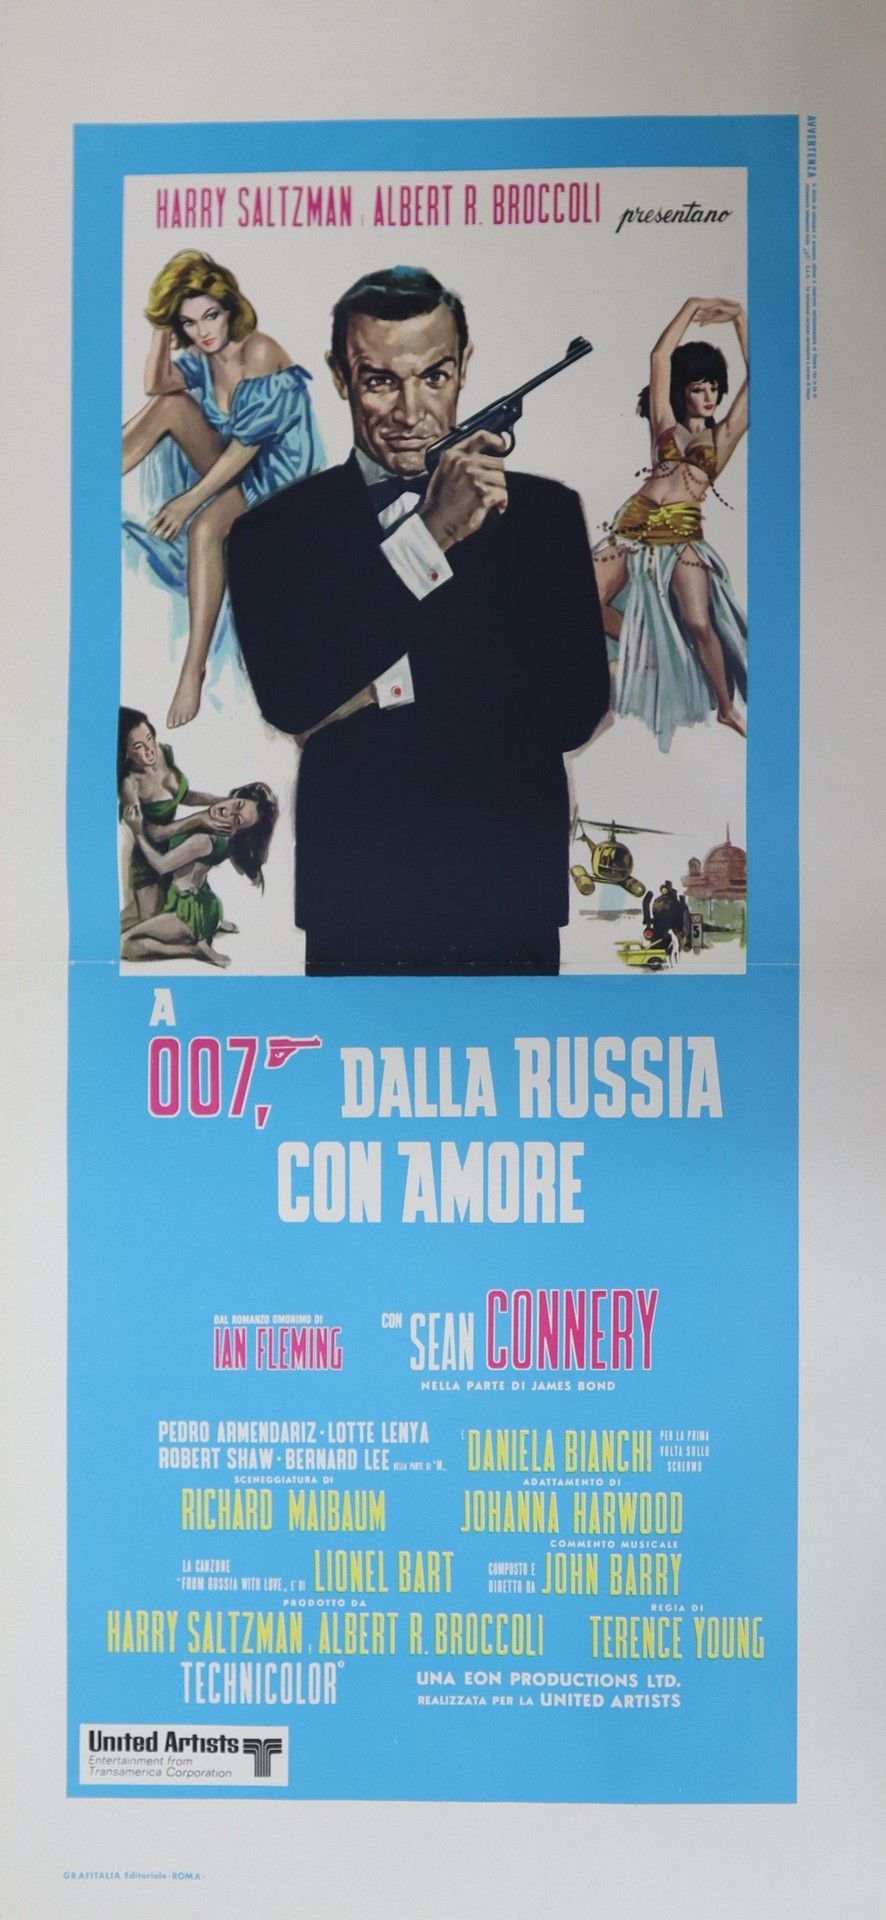 Affiche de film "A 007, from Russia with love" 70 cm x 33 cm Signes normaux d'ut&hellip;